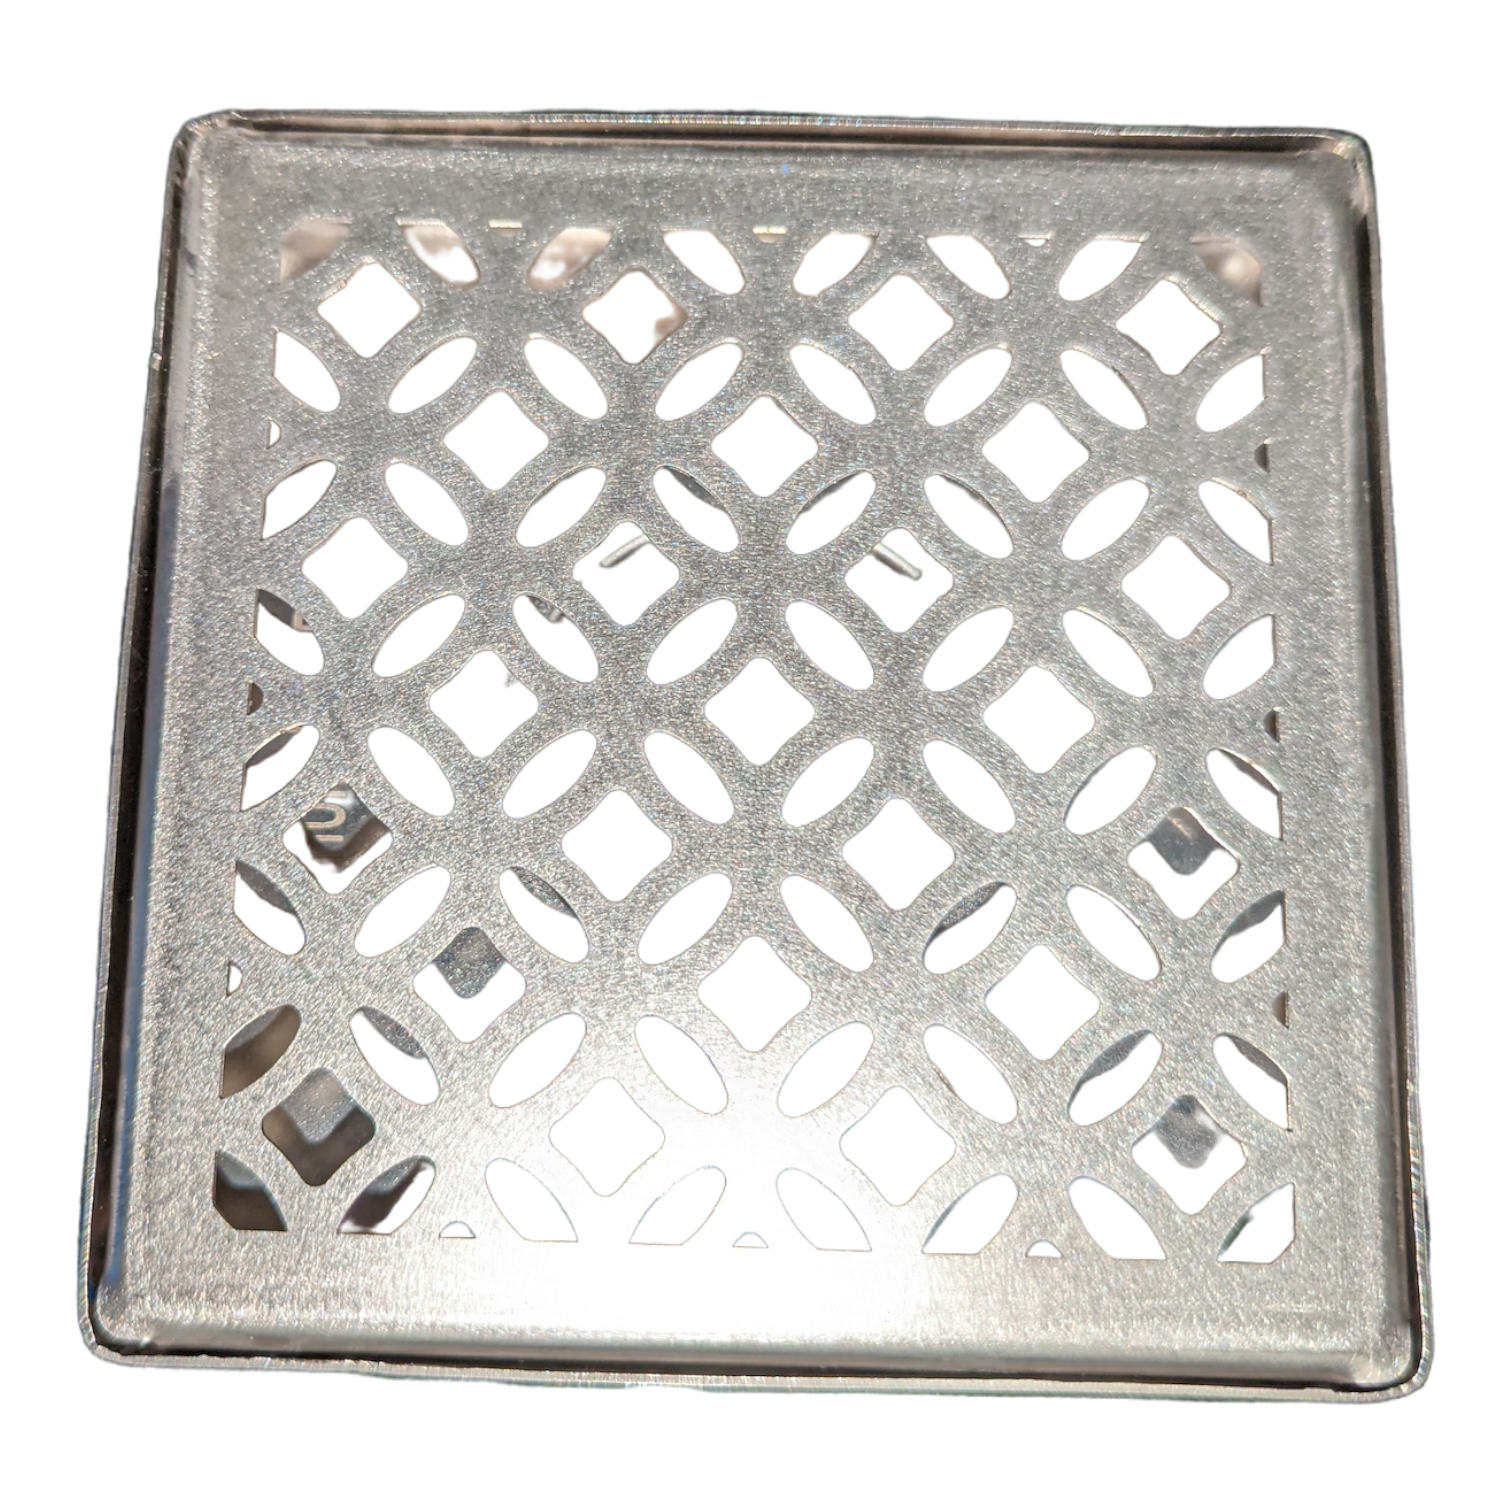 Built Industrial 5.8-inch Stainless Steel Square Shower Drain